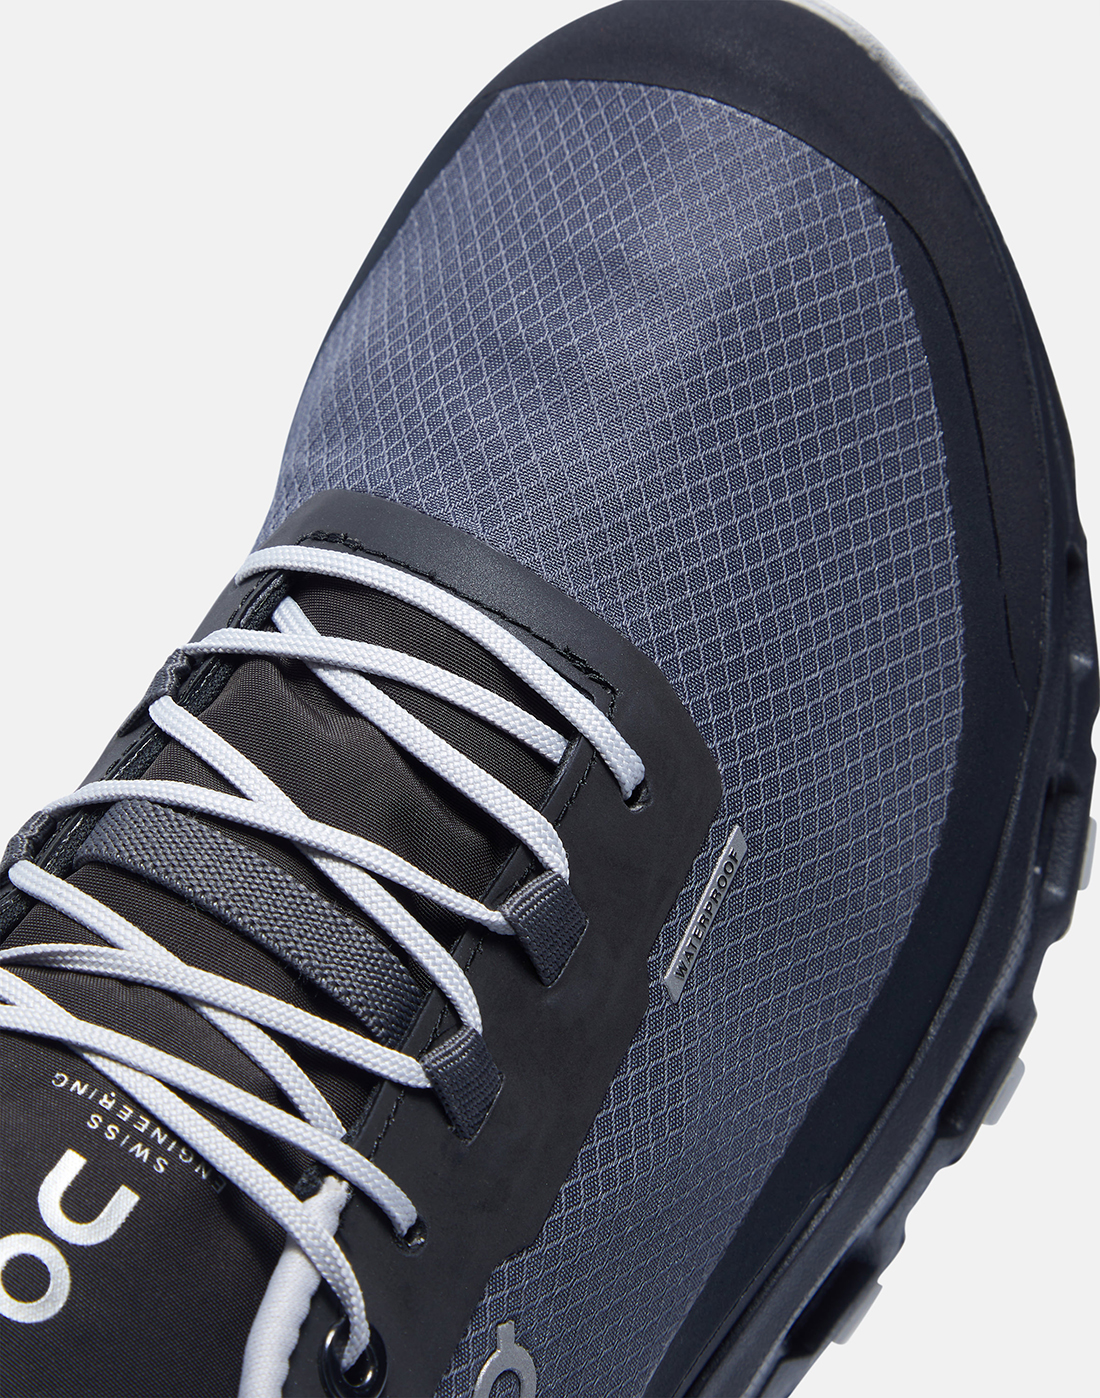 On Running Mens CloudVista Trail - Black | Life Style Sports IE